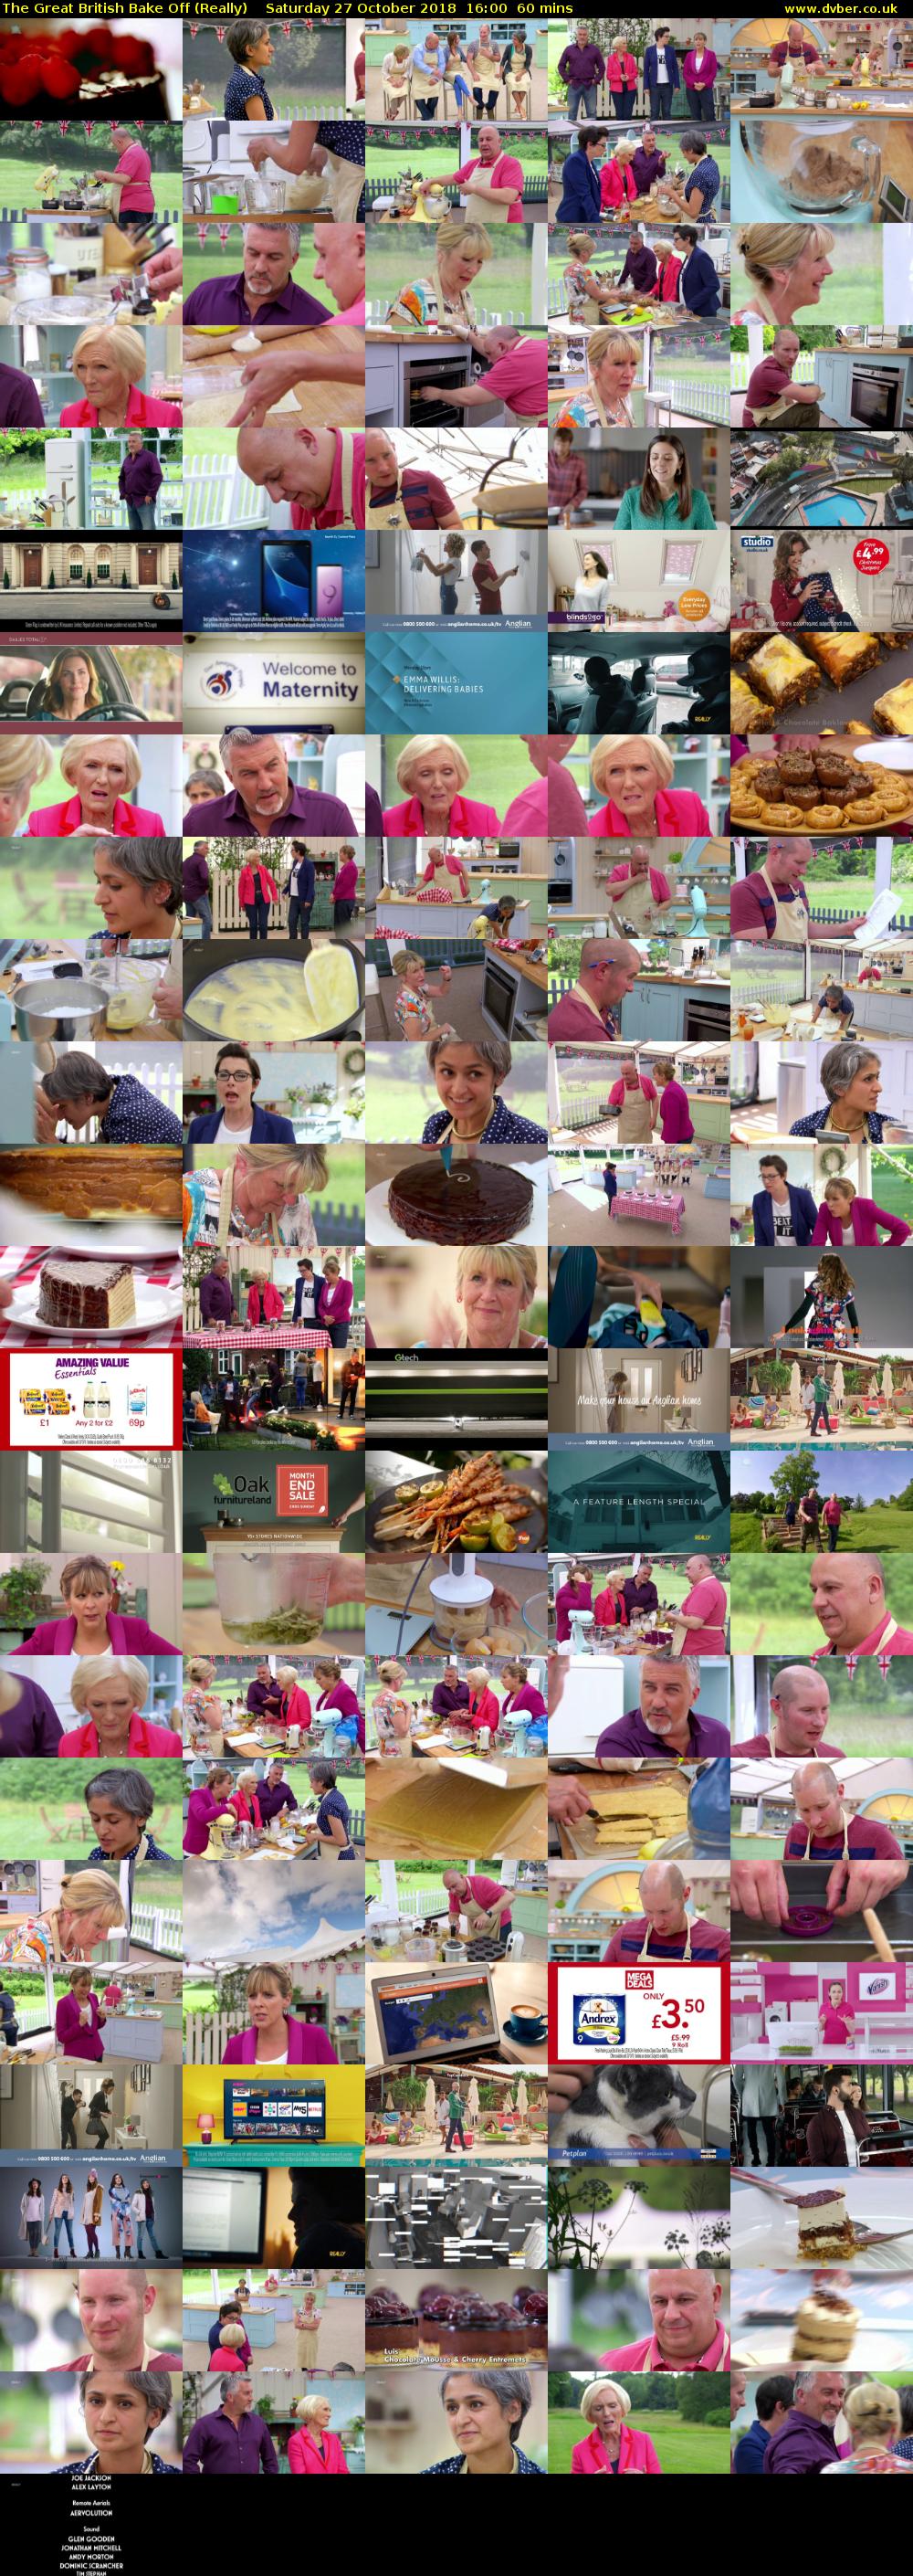 The Great British Bake Off (Really) Saturday 27 October 2018 16:00 - 17:00